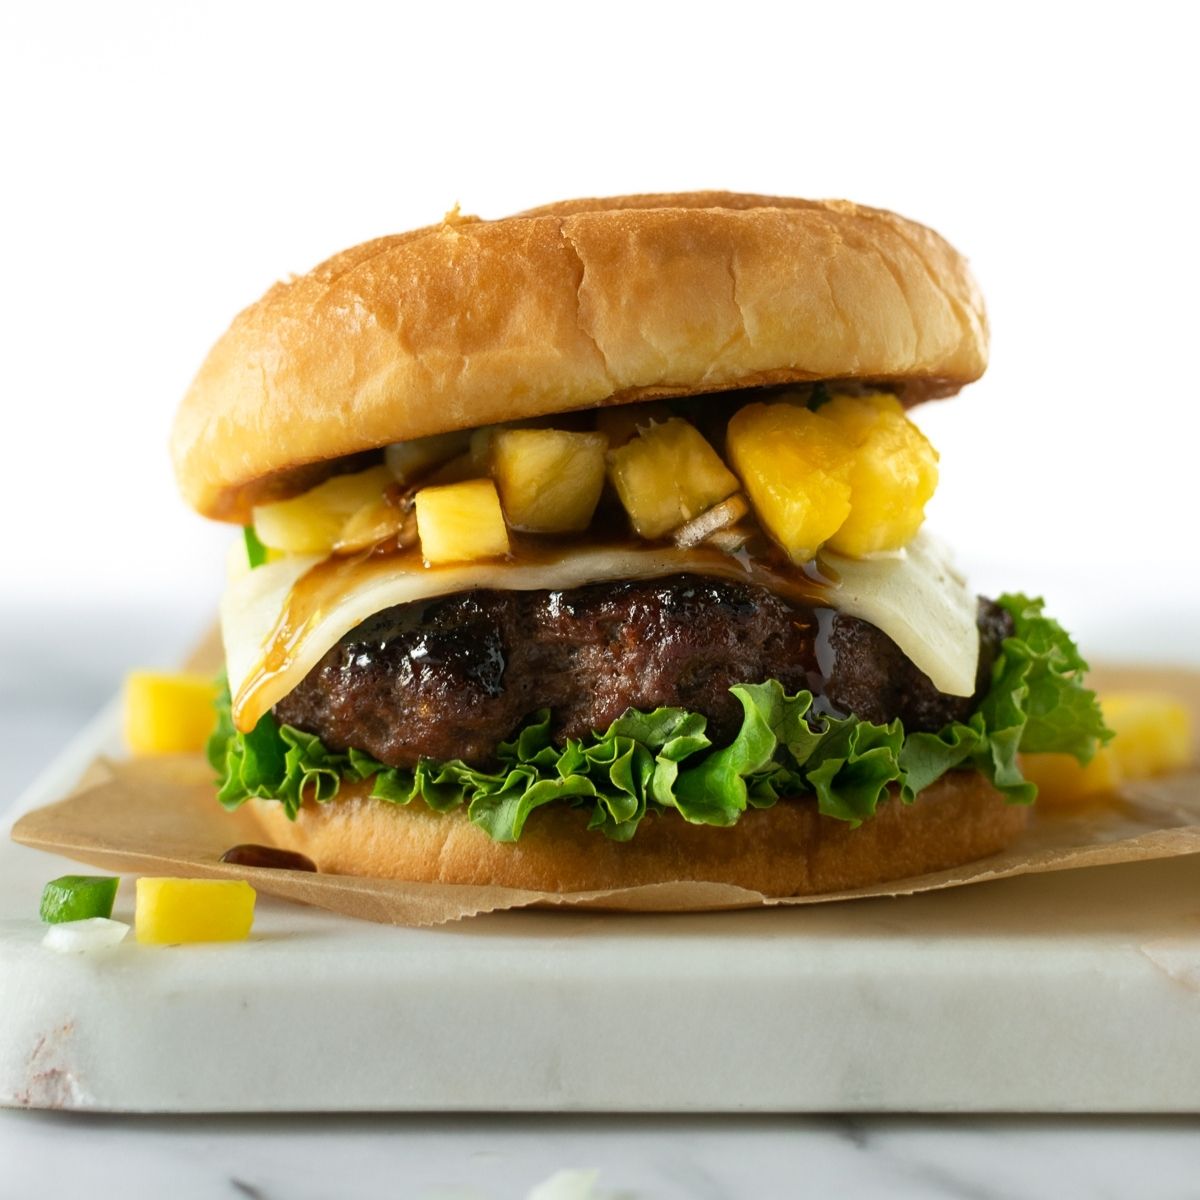 teriyaki burgers with melted cheese, lettuce, and pineapple salsa.